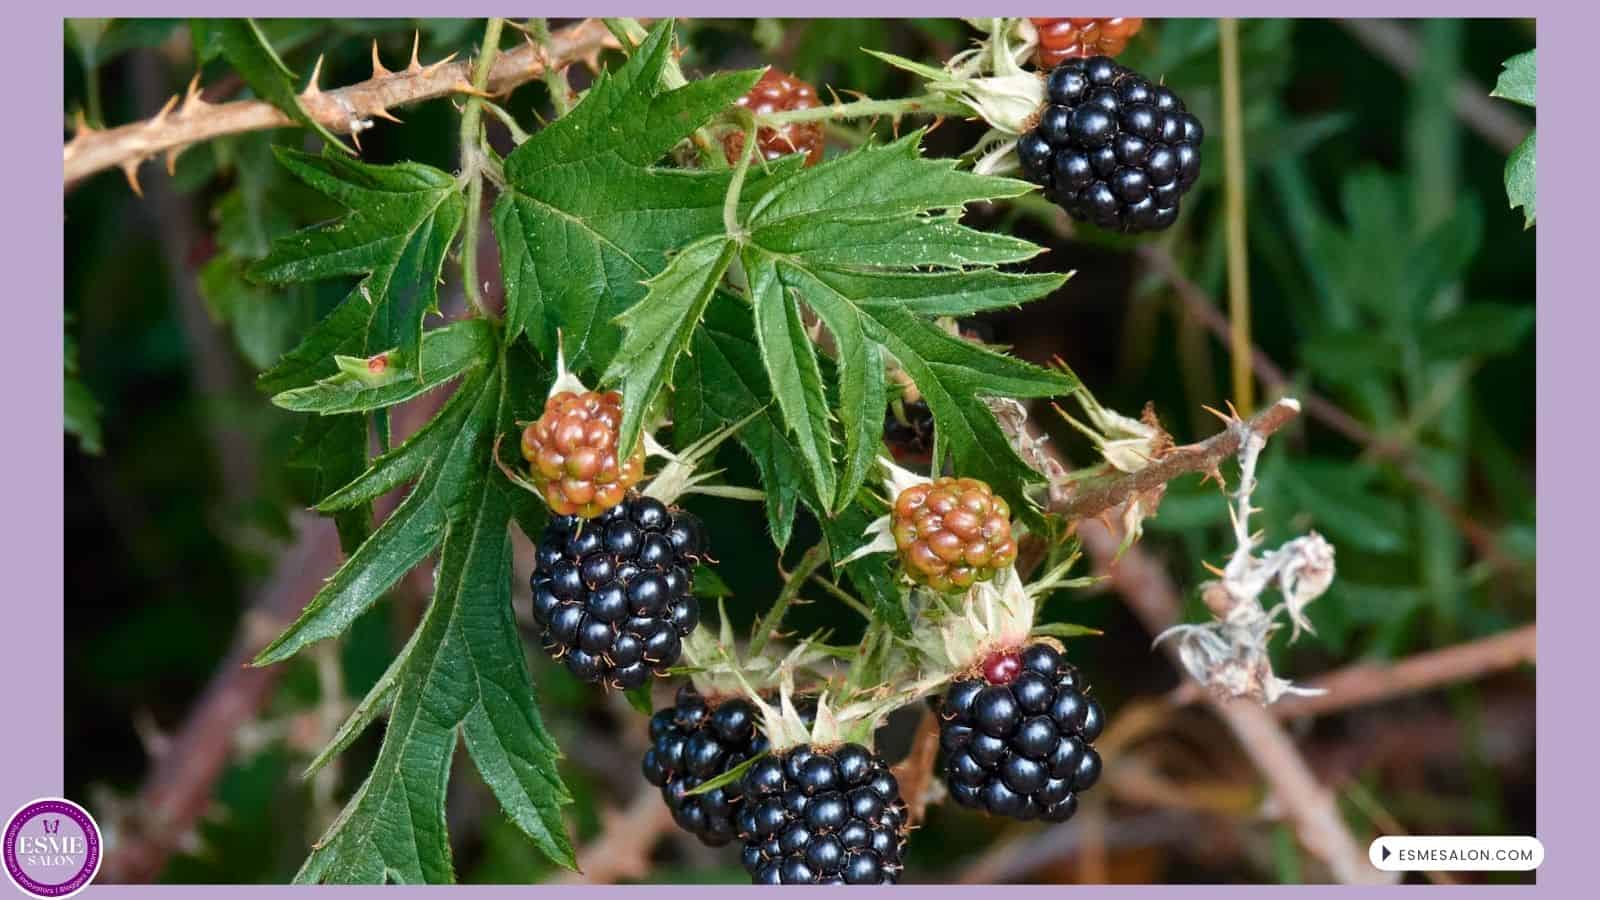 an image of a bush full of Blackberries ready for picking